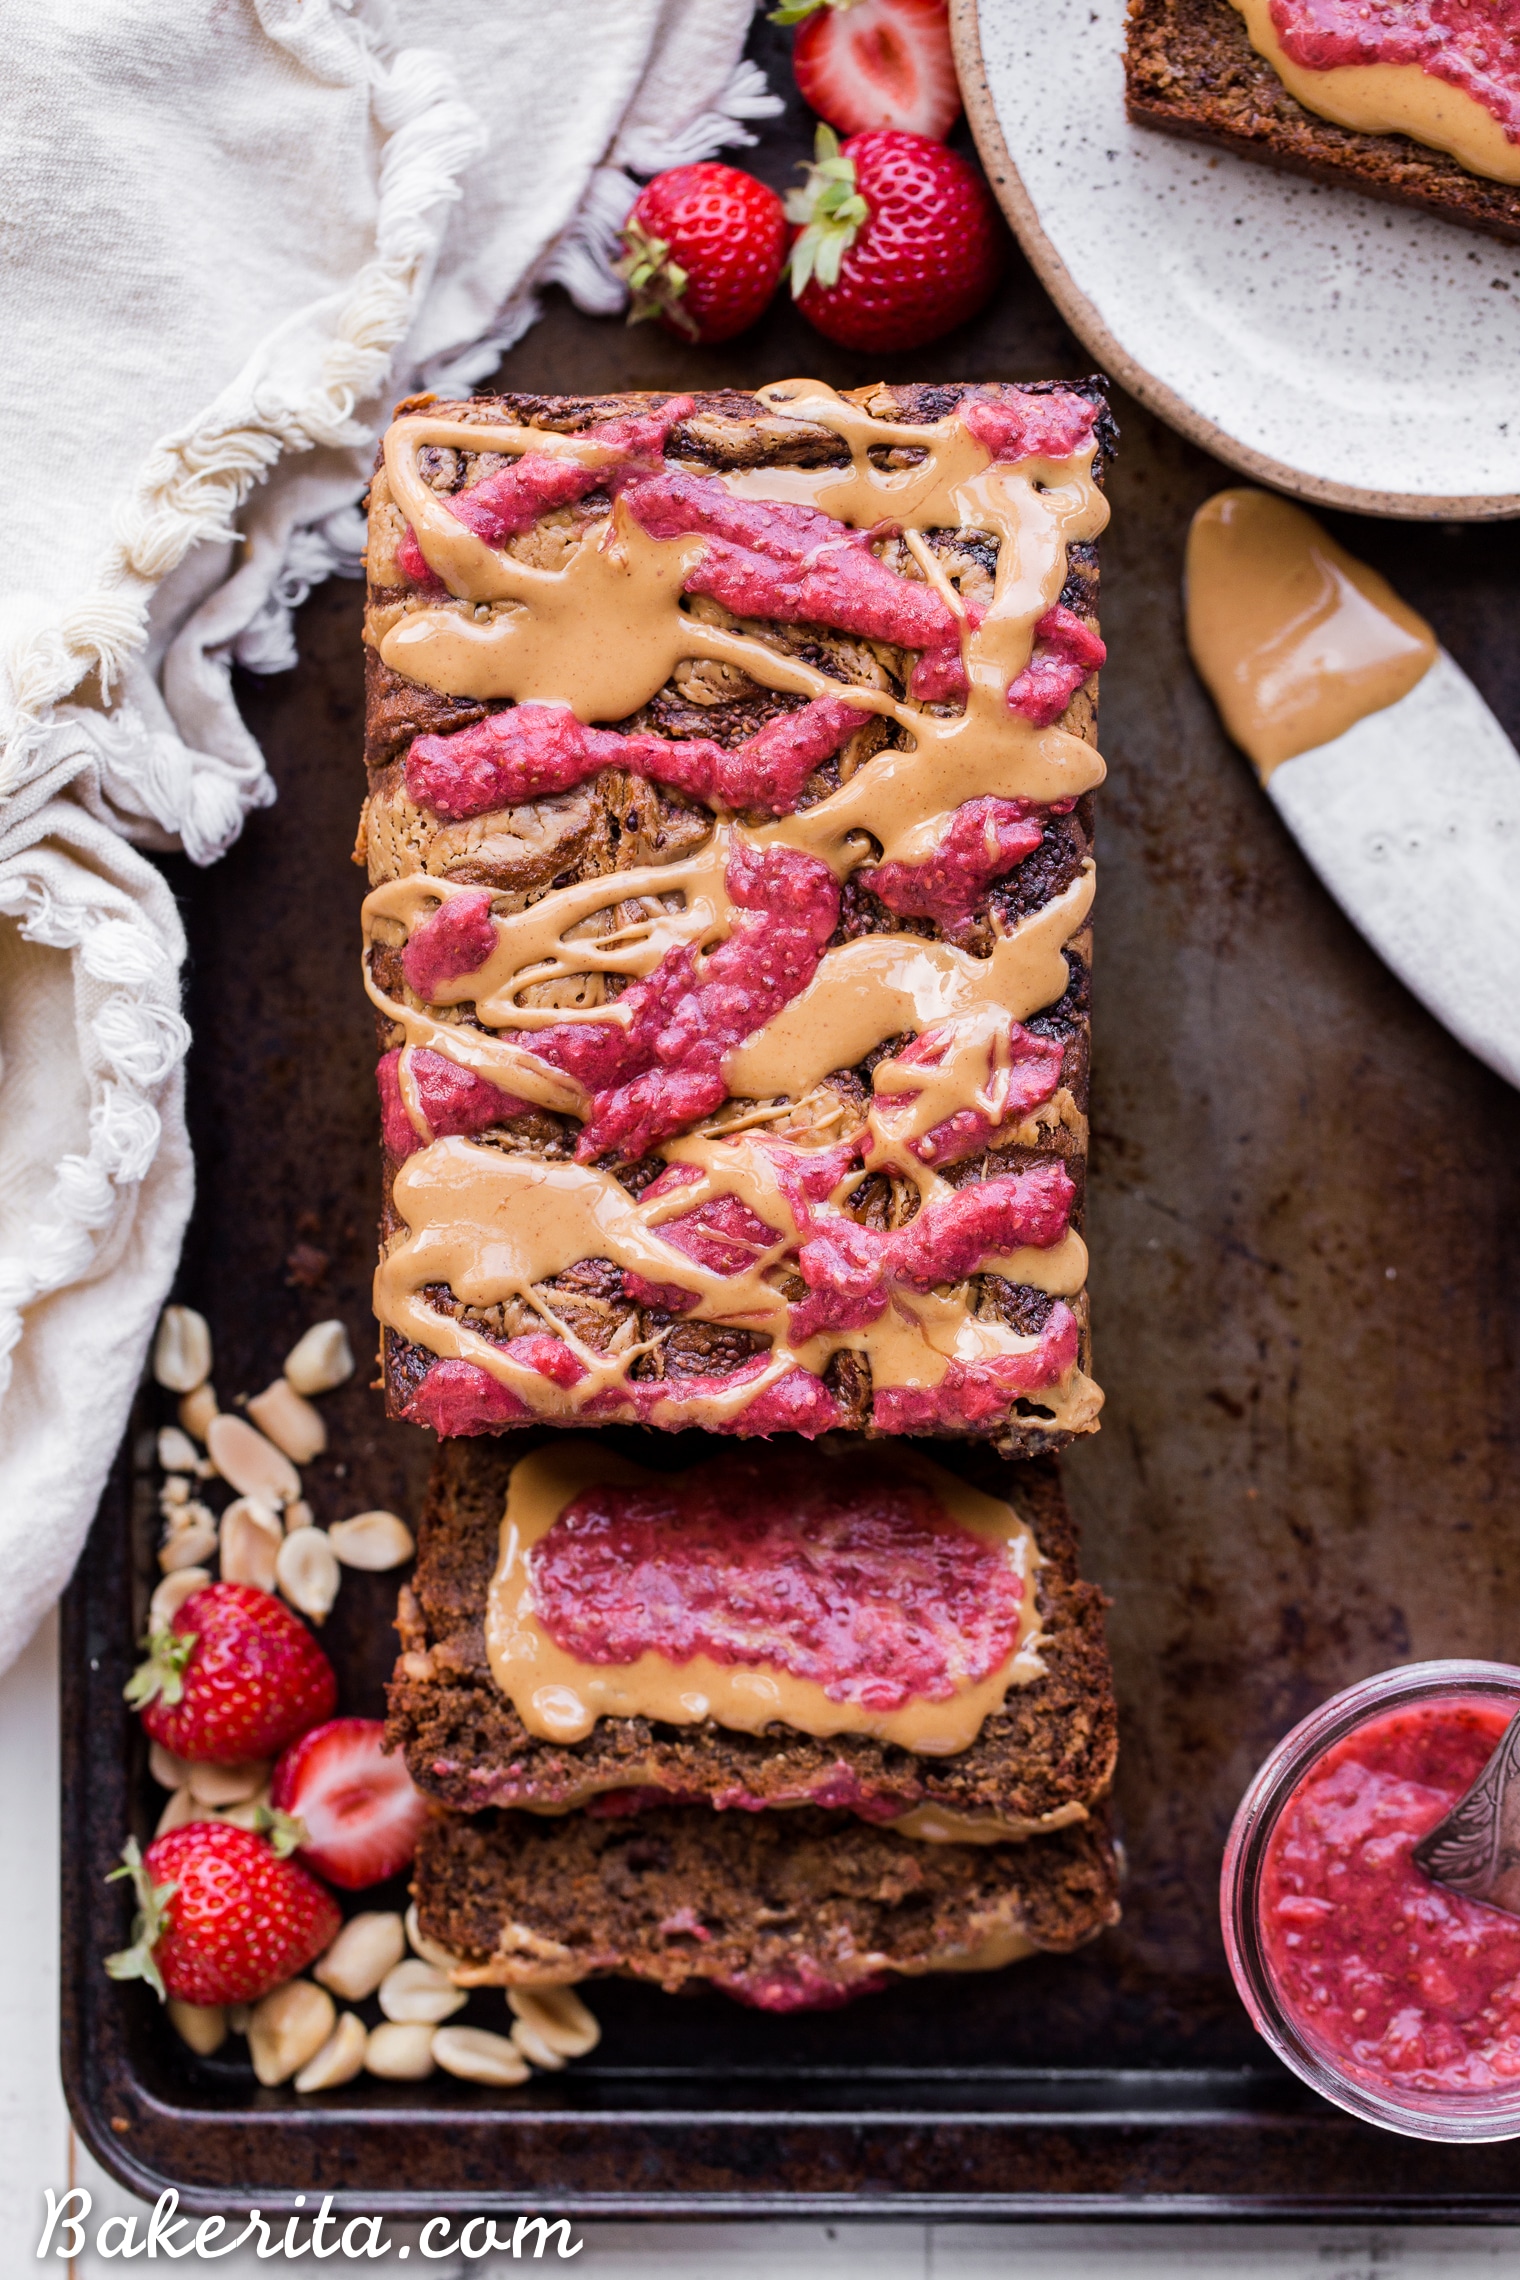 This Peanut Butter & Jelly Banana Bread will remind you of a PB&J sandwich, but in soft & sweet banana bread form. This recipe is gluten-free, vegan, and layered with homemade strawberry chia jam and creamy peanut butter.